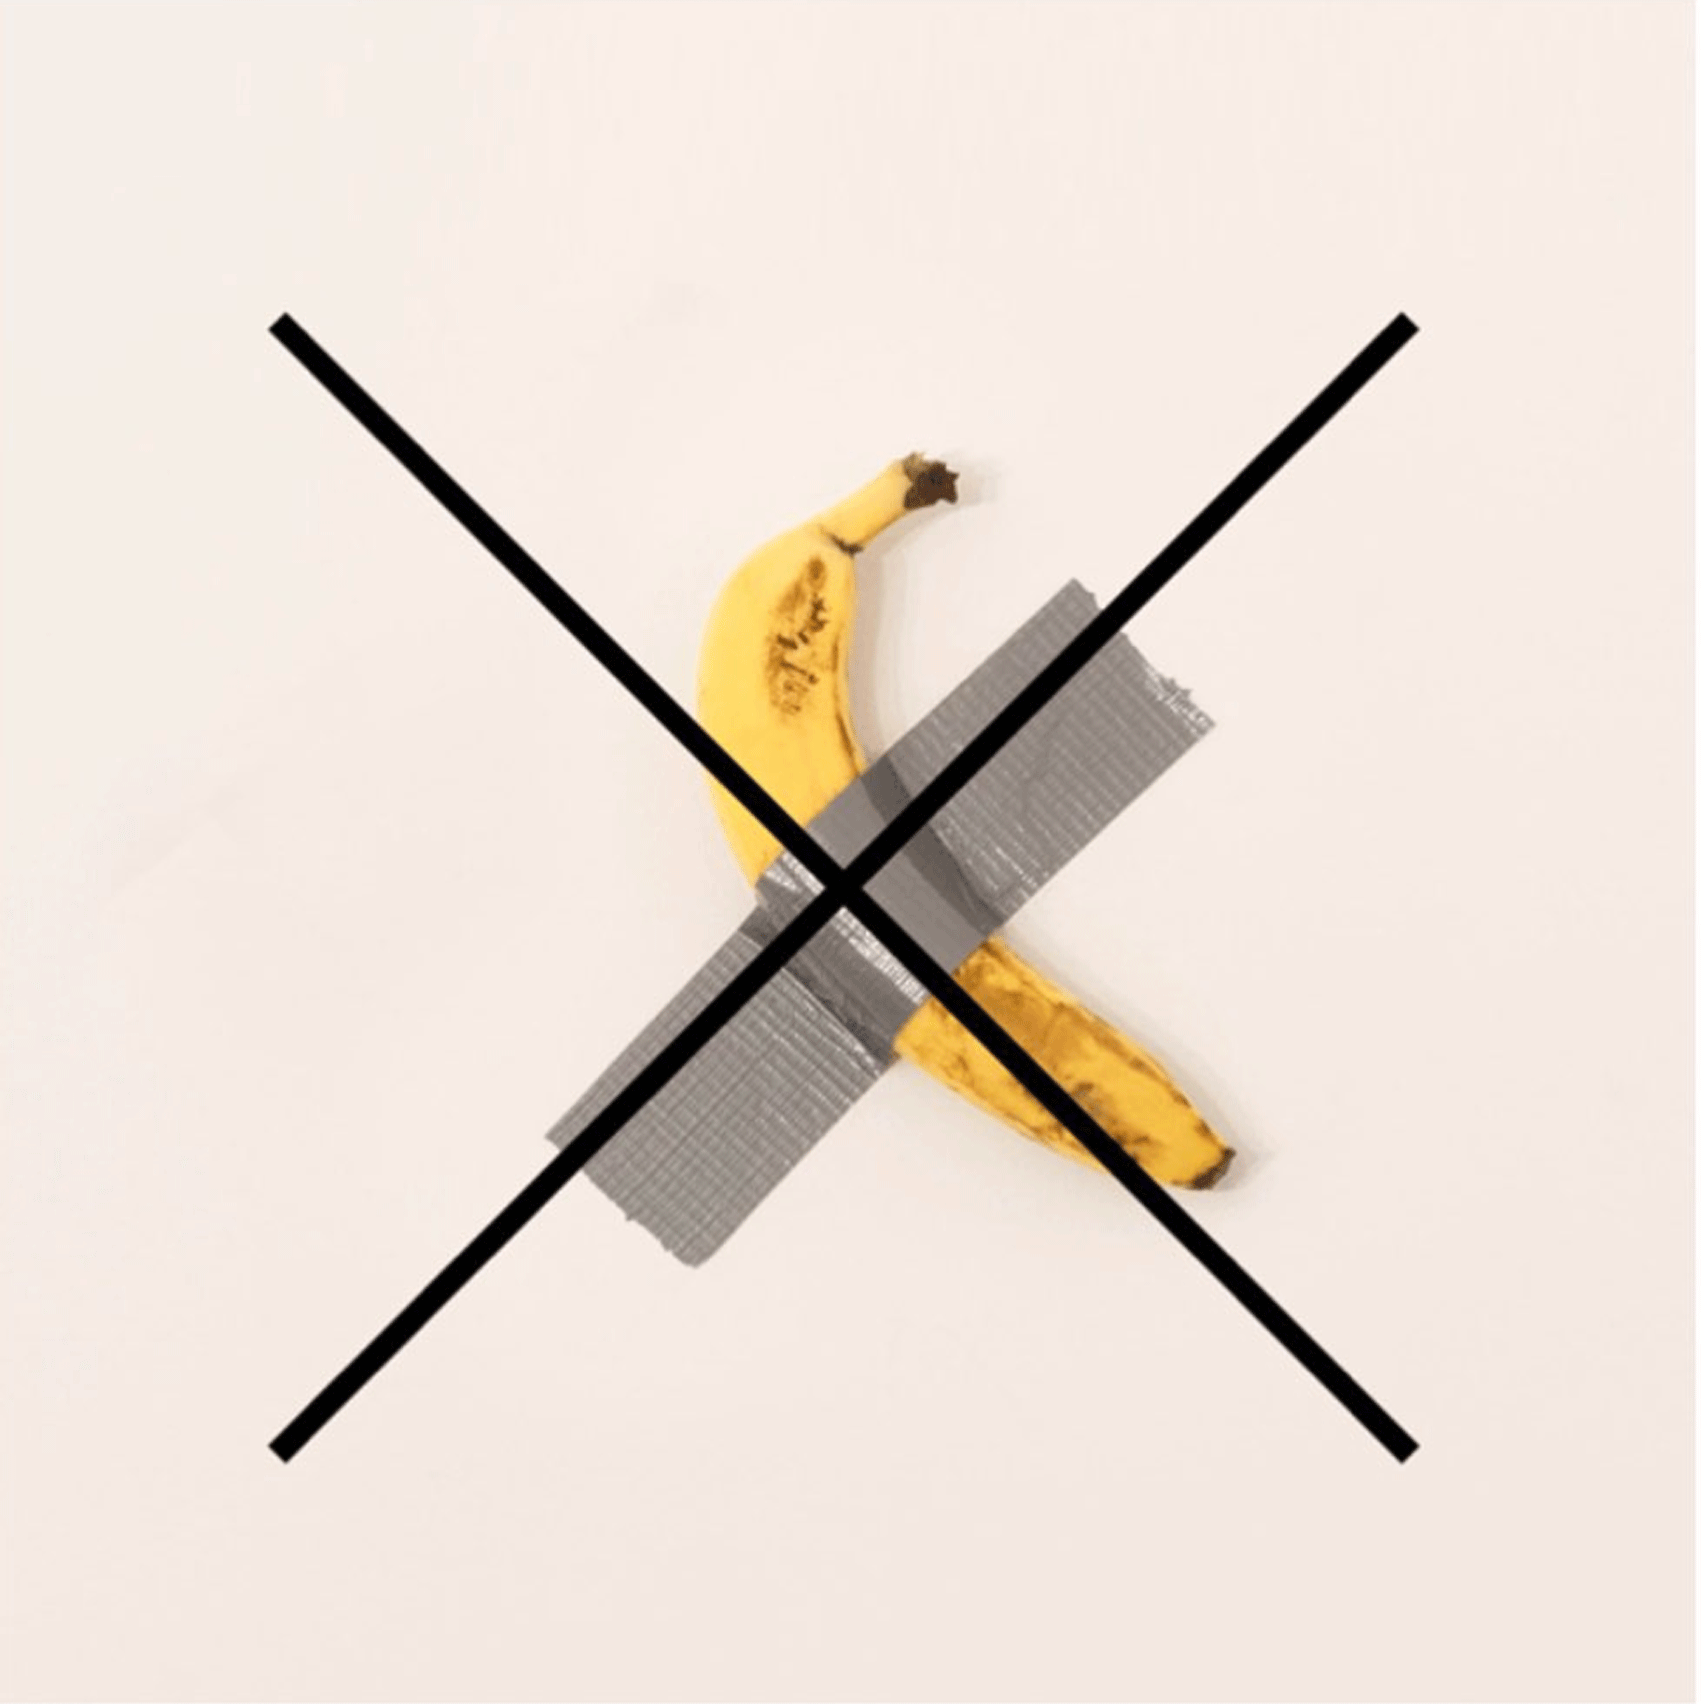 This week, the $120,000 Art Basel banana art was removed and Foster + Partners introduced a sustainability manifesto